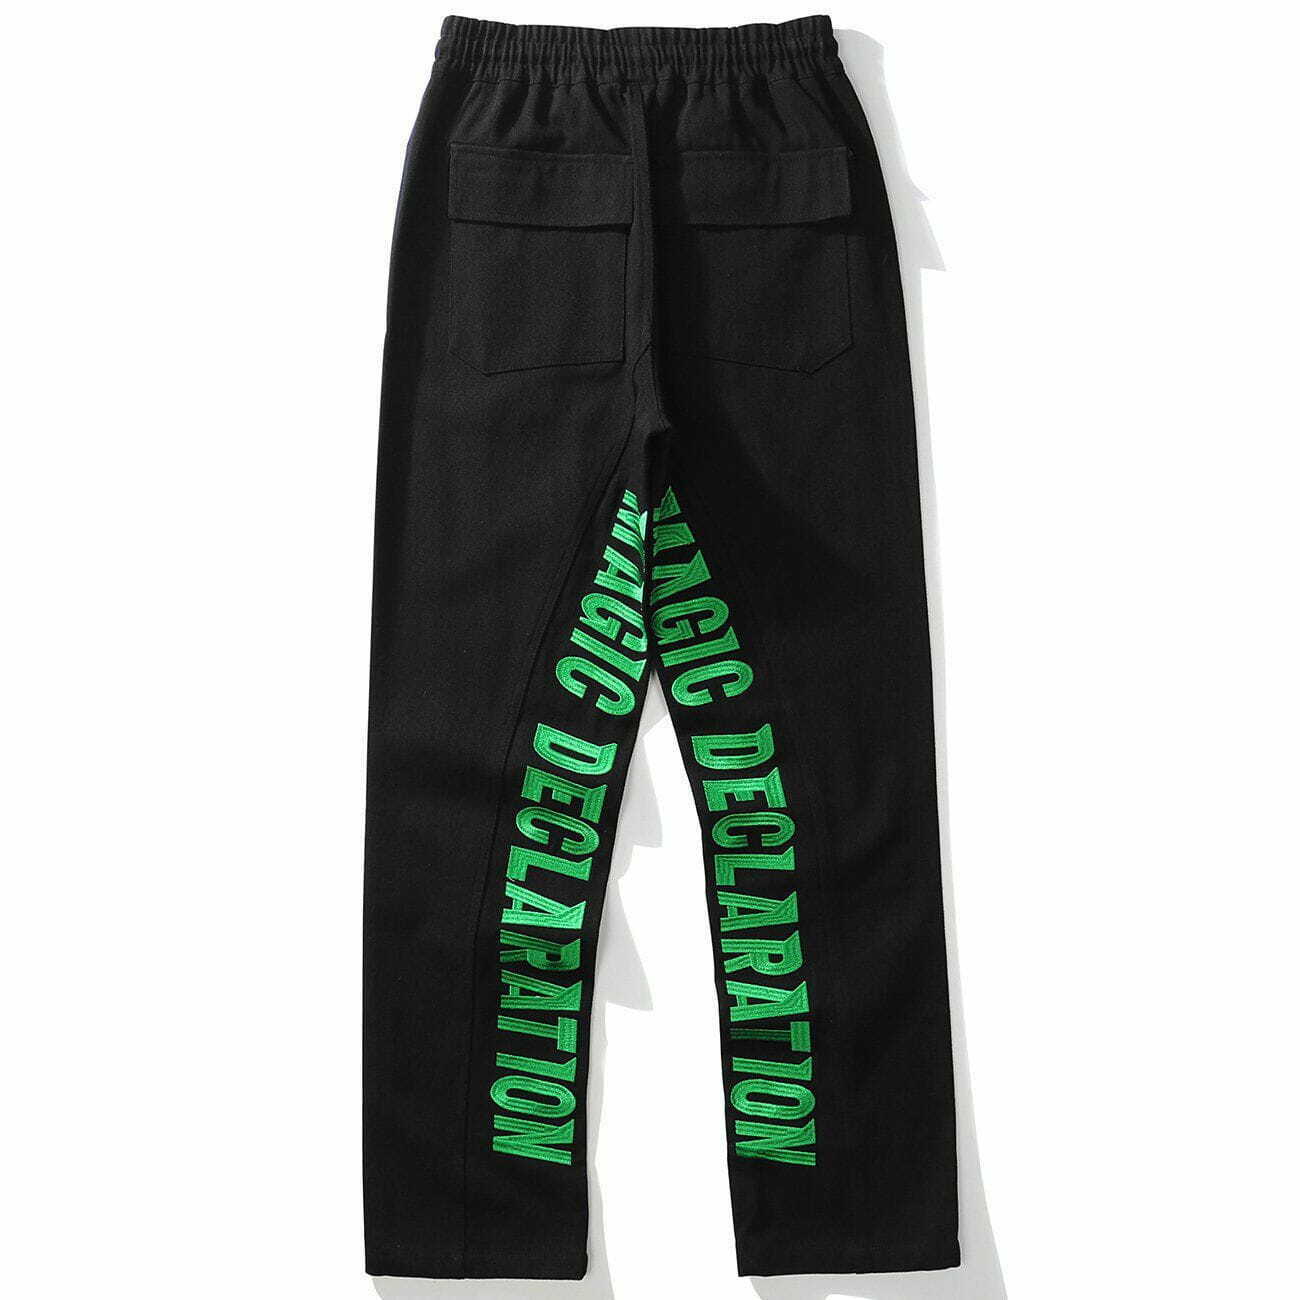 embroidered letter pants chic & urban streetwear 5952